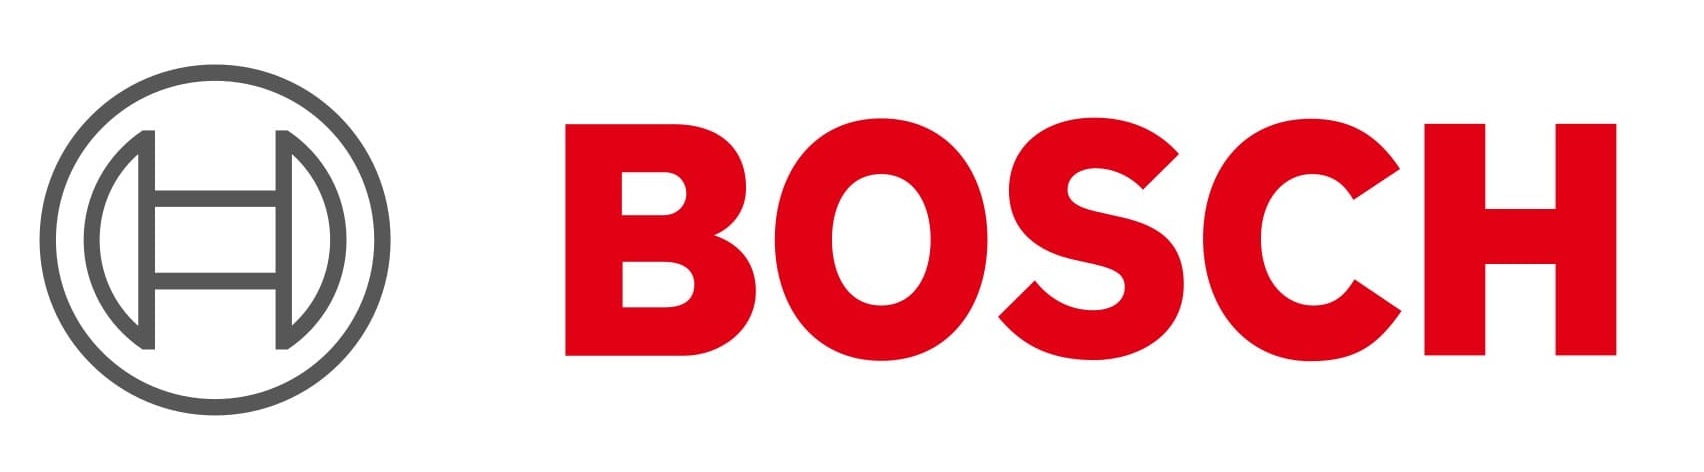 BOSCH Oven Repair Company, Kenmore Oven Electrician